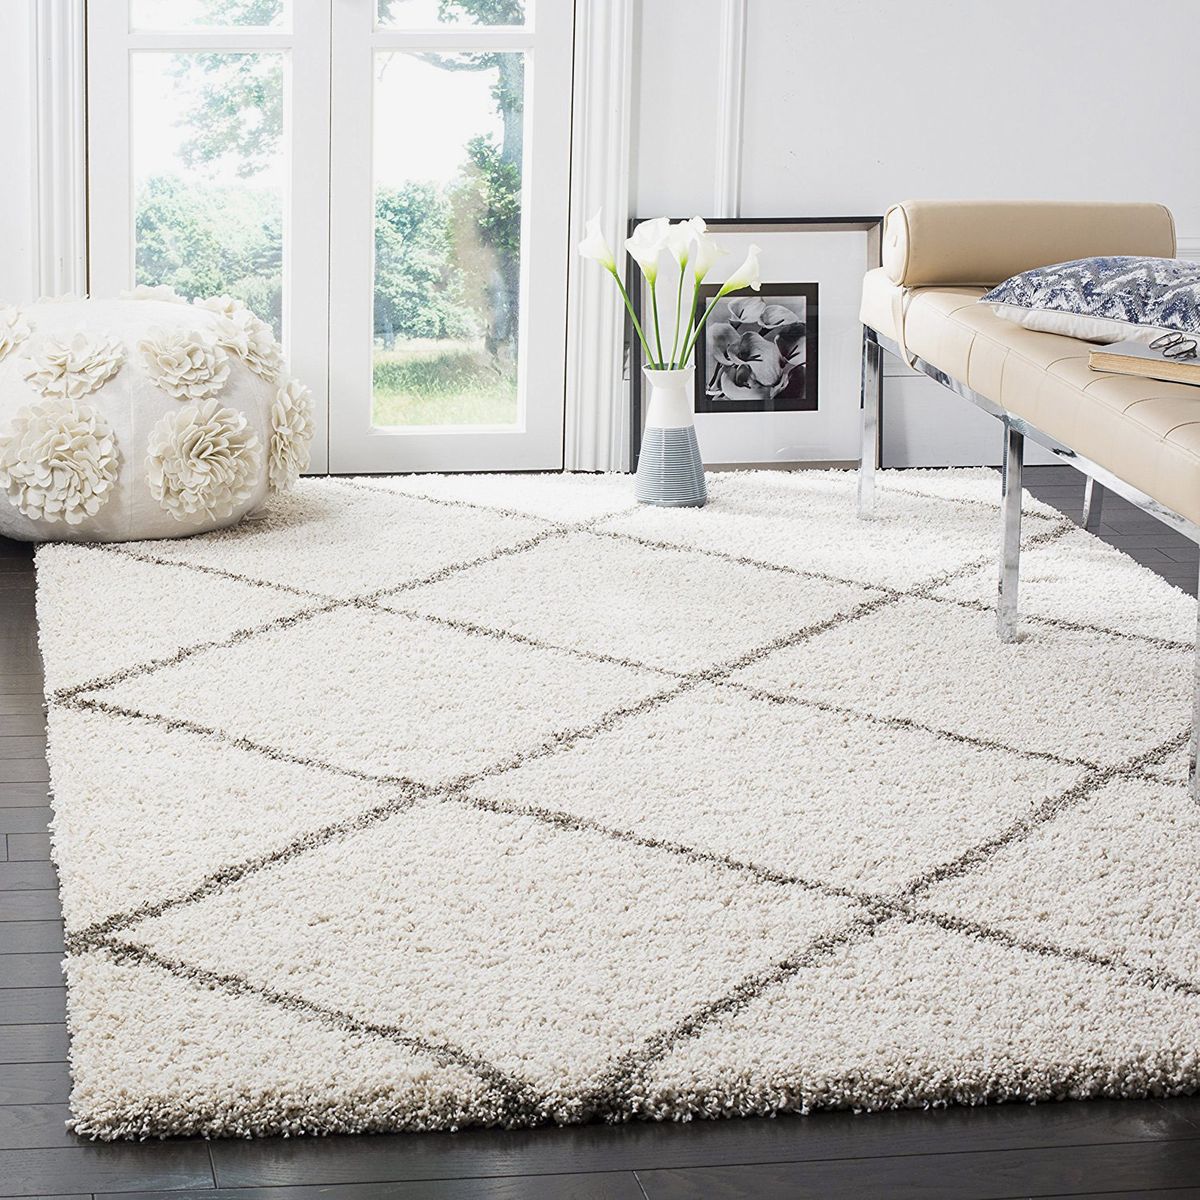 GREAT BLACK FRIDAY DEALS Cheap Grey Living Room Rugs Shaggy & Modern Rugs 